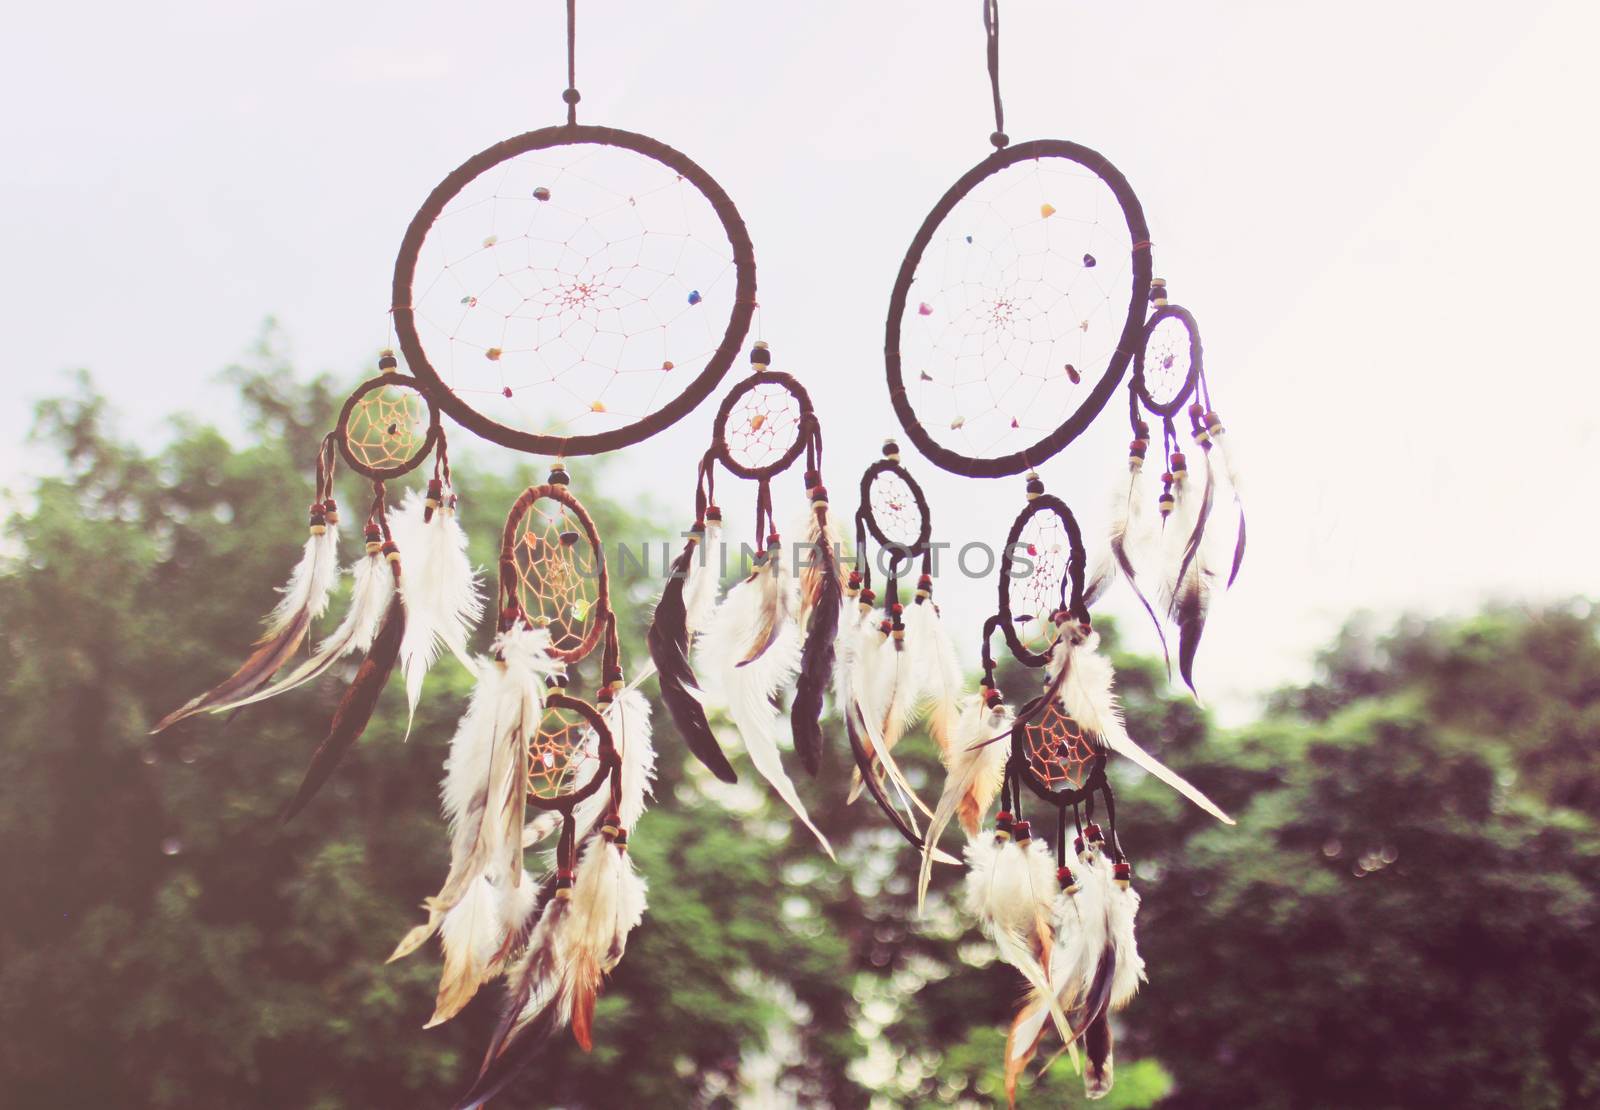 Traditional dreamcatcher with retro filter effect by nuchylee